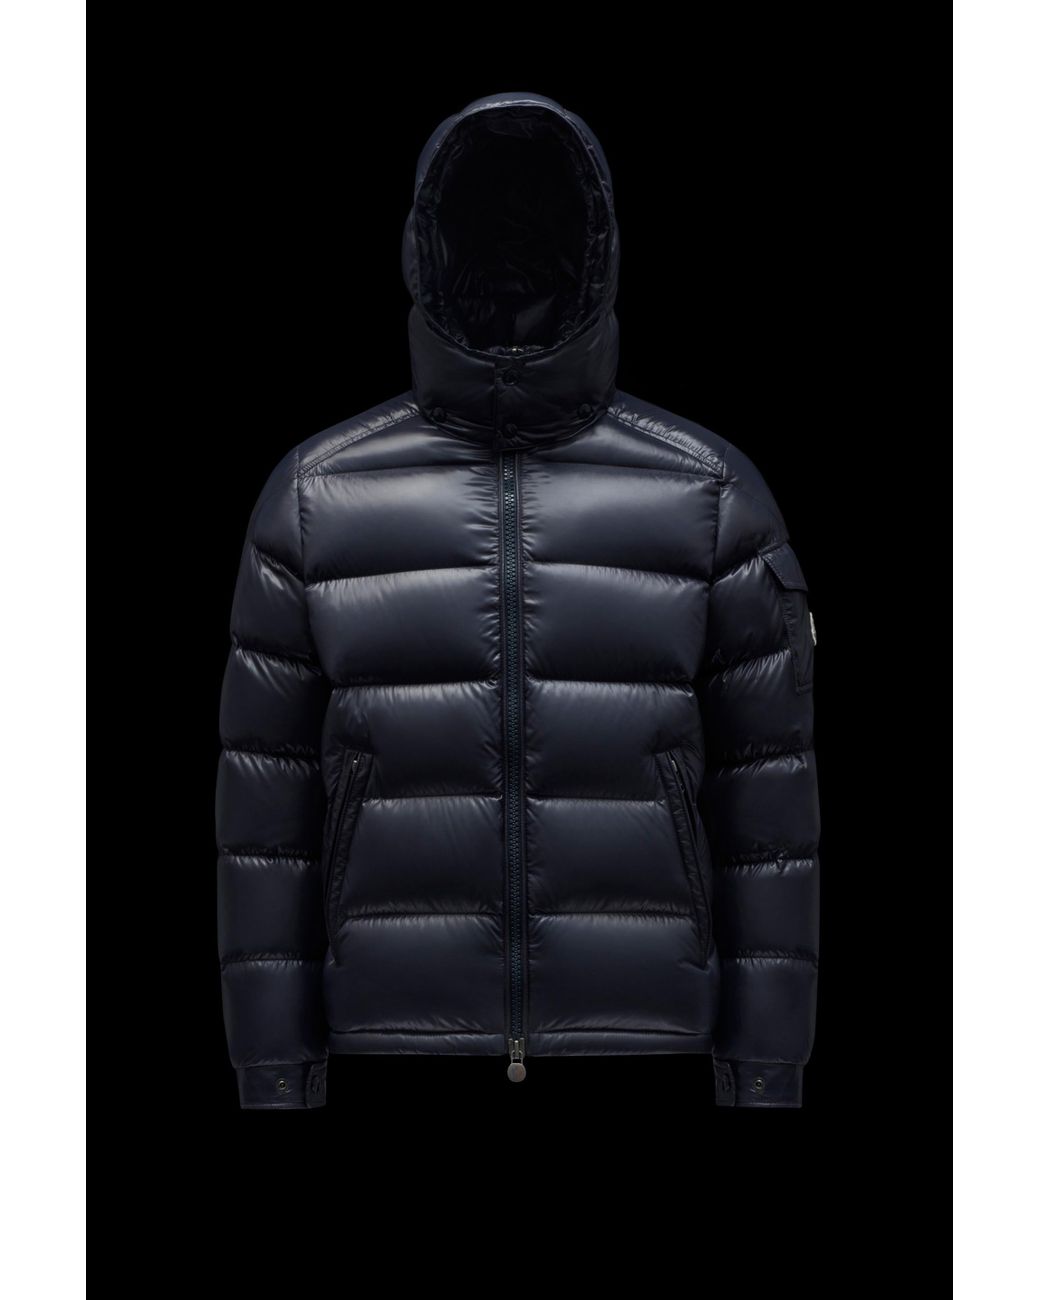 moncler maya dhgate,OFF 63%,www.concordehotels.com.tr